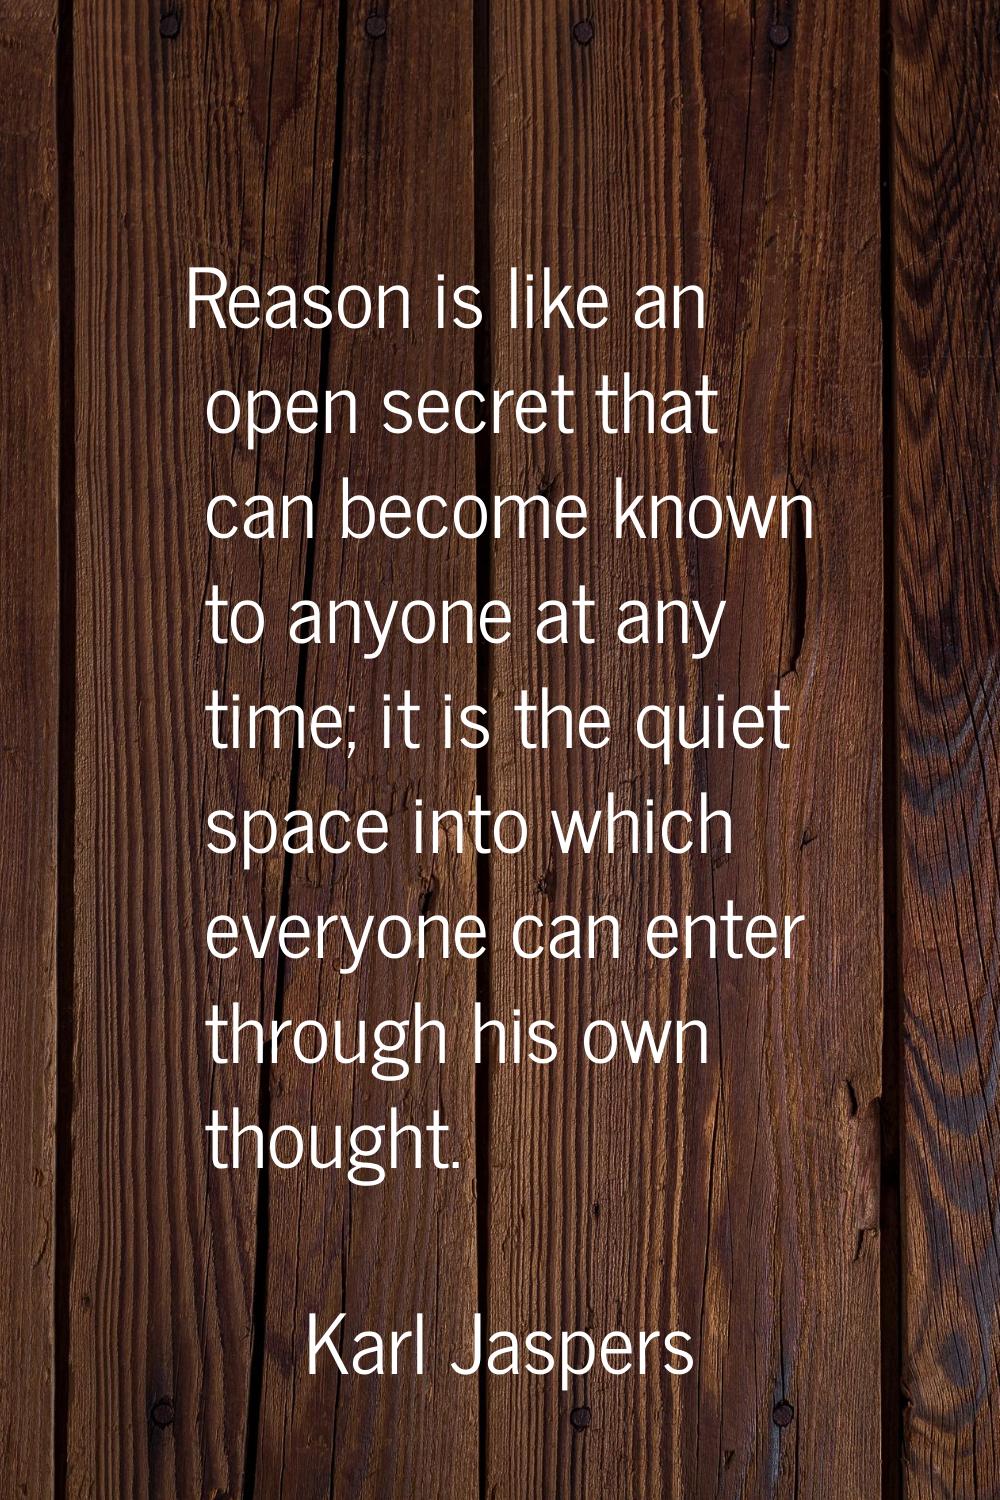 Reason is like an open secret that can become known to anyone at any time; it is the quiet space in